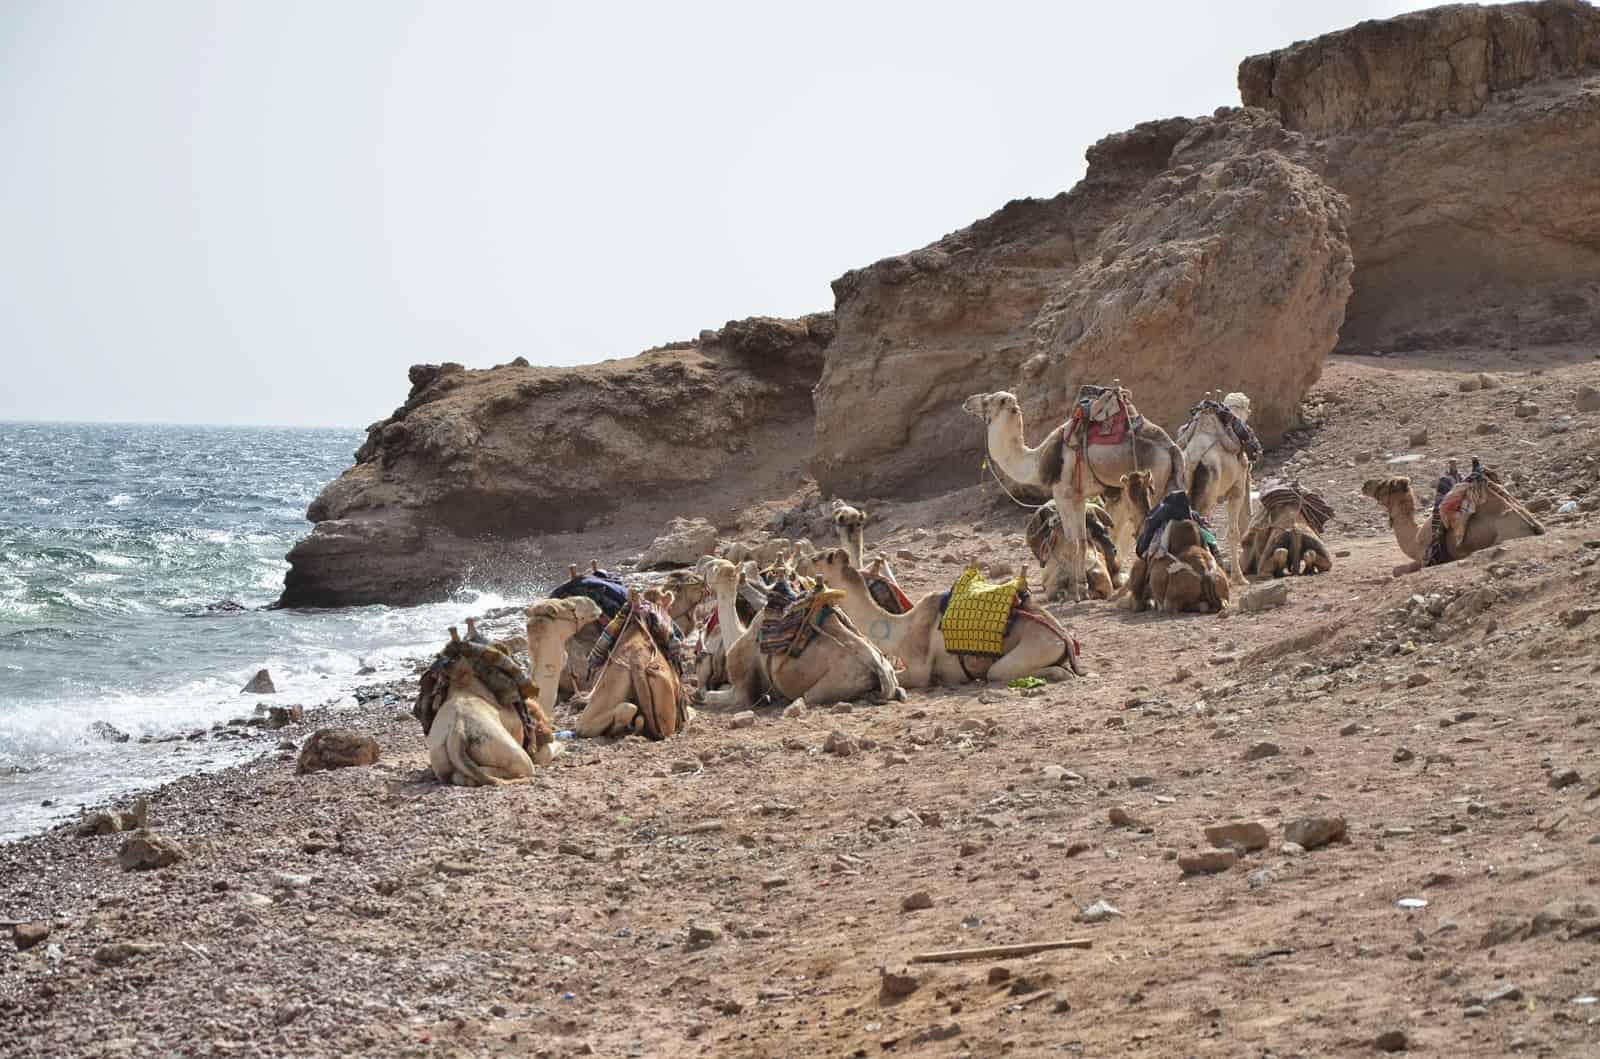 Camels on the beach at Abu Galom in Sinai, Egypt